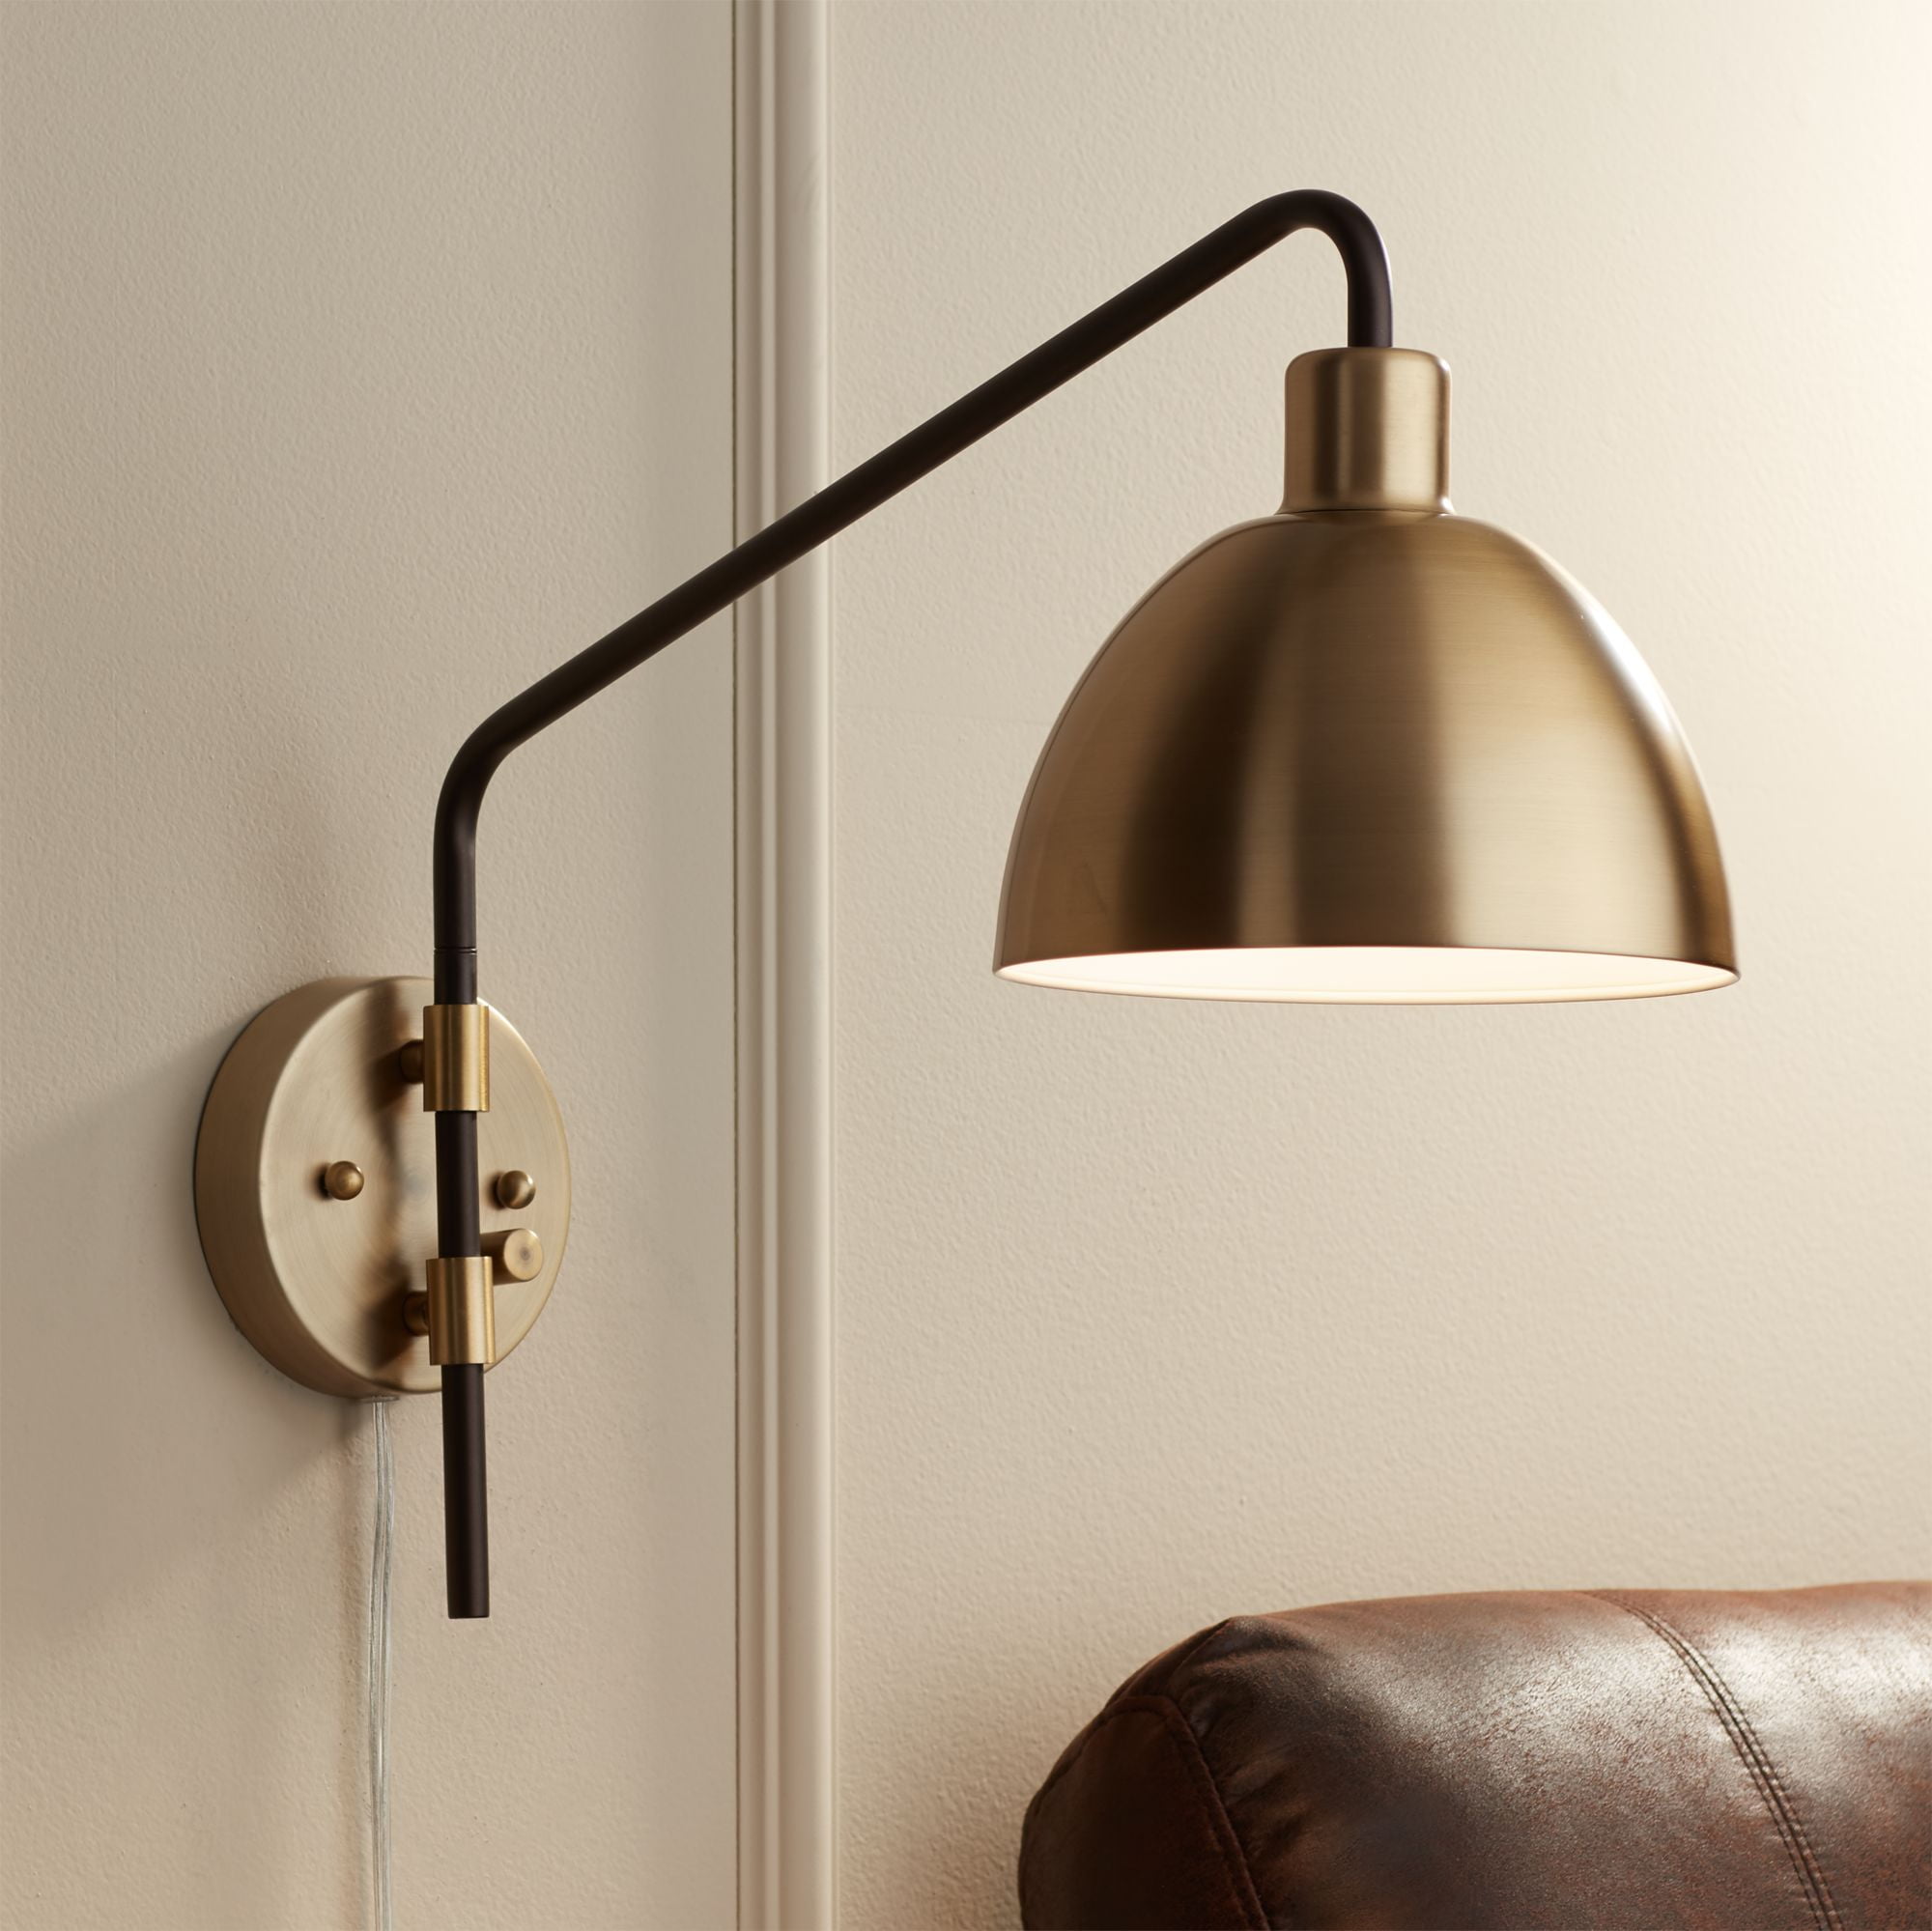 Brushed Brass Wall Sconce Industrial Vintage Lamp Swing Arm Wall Light Fixture 